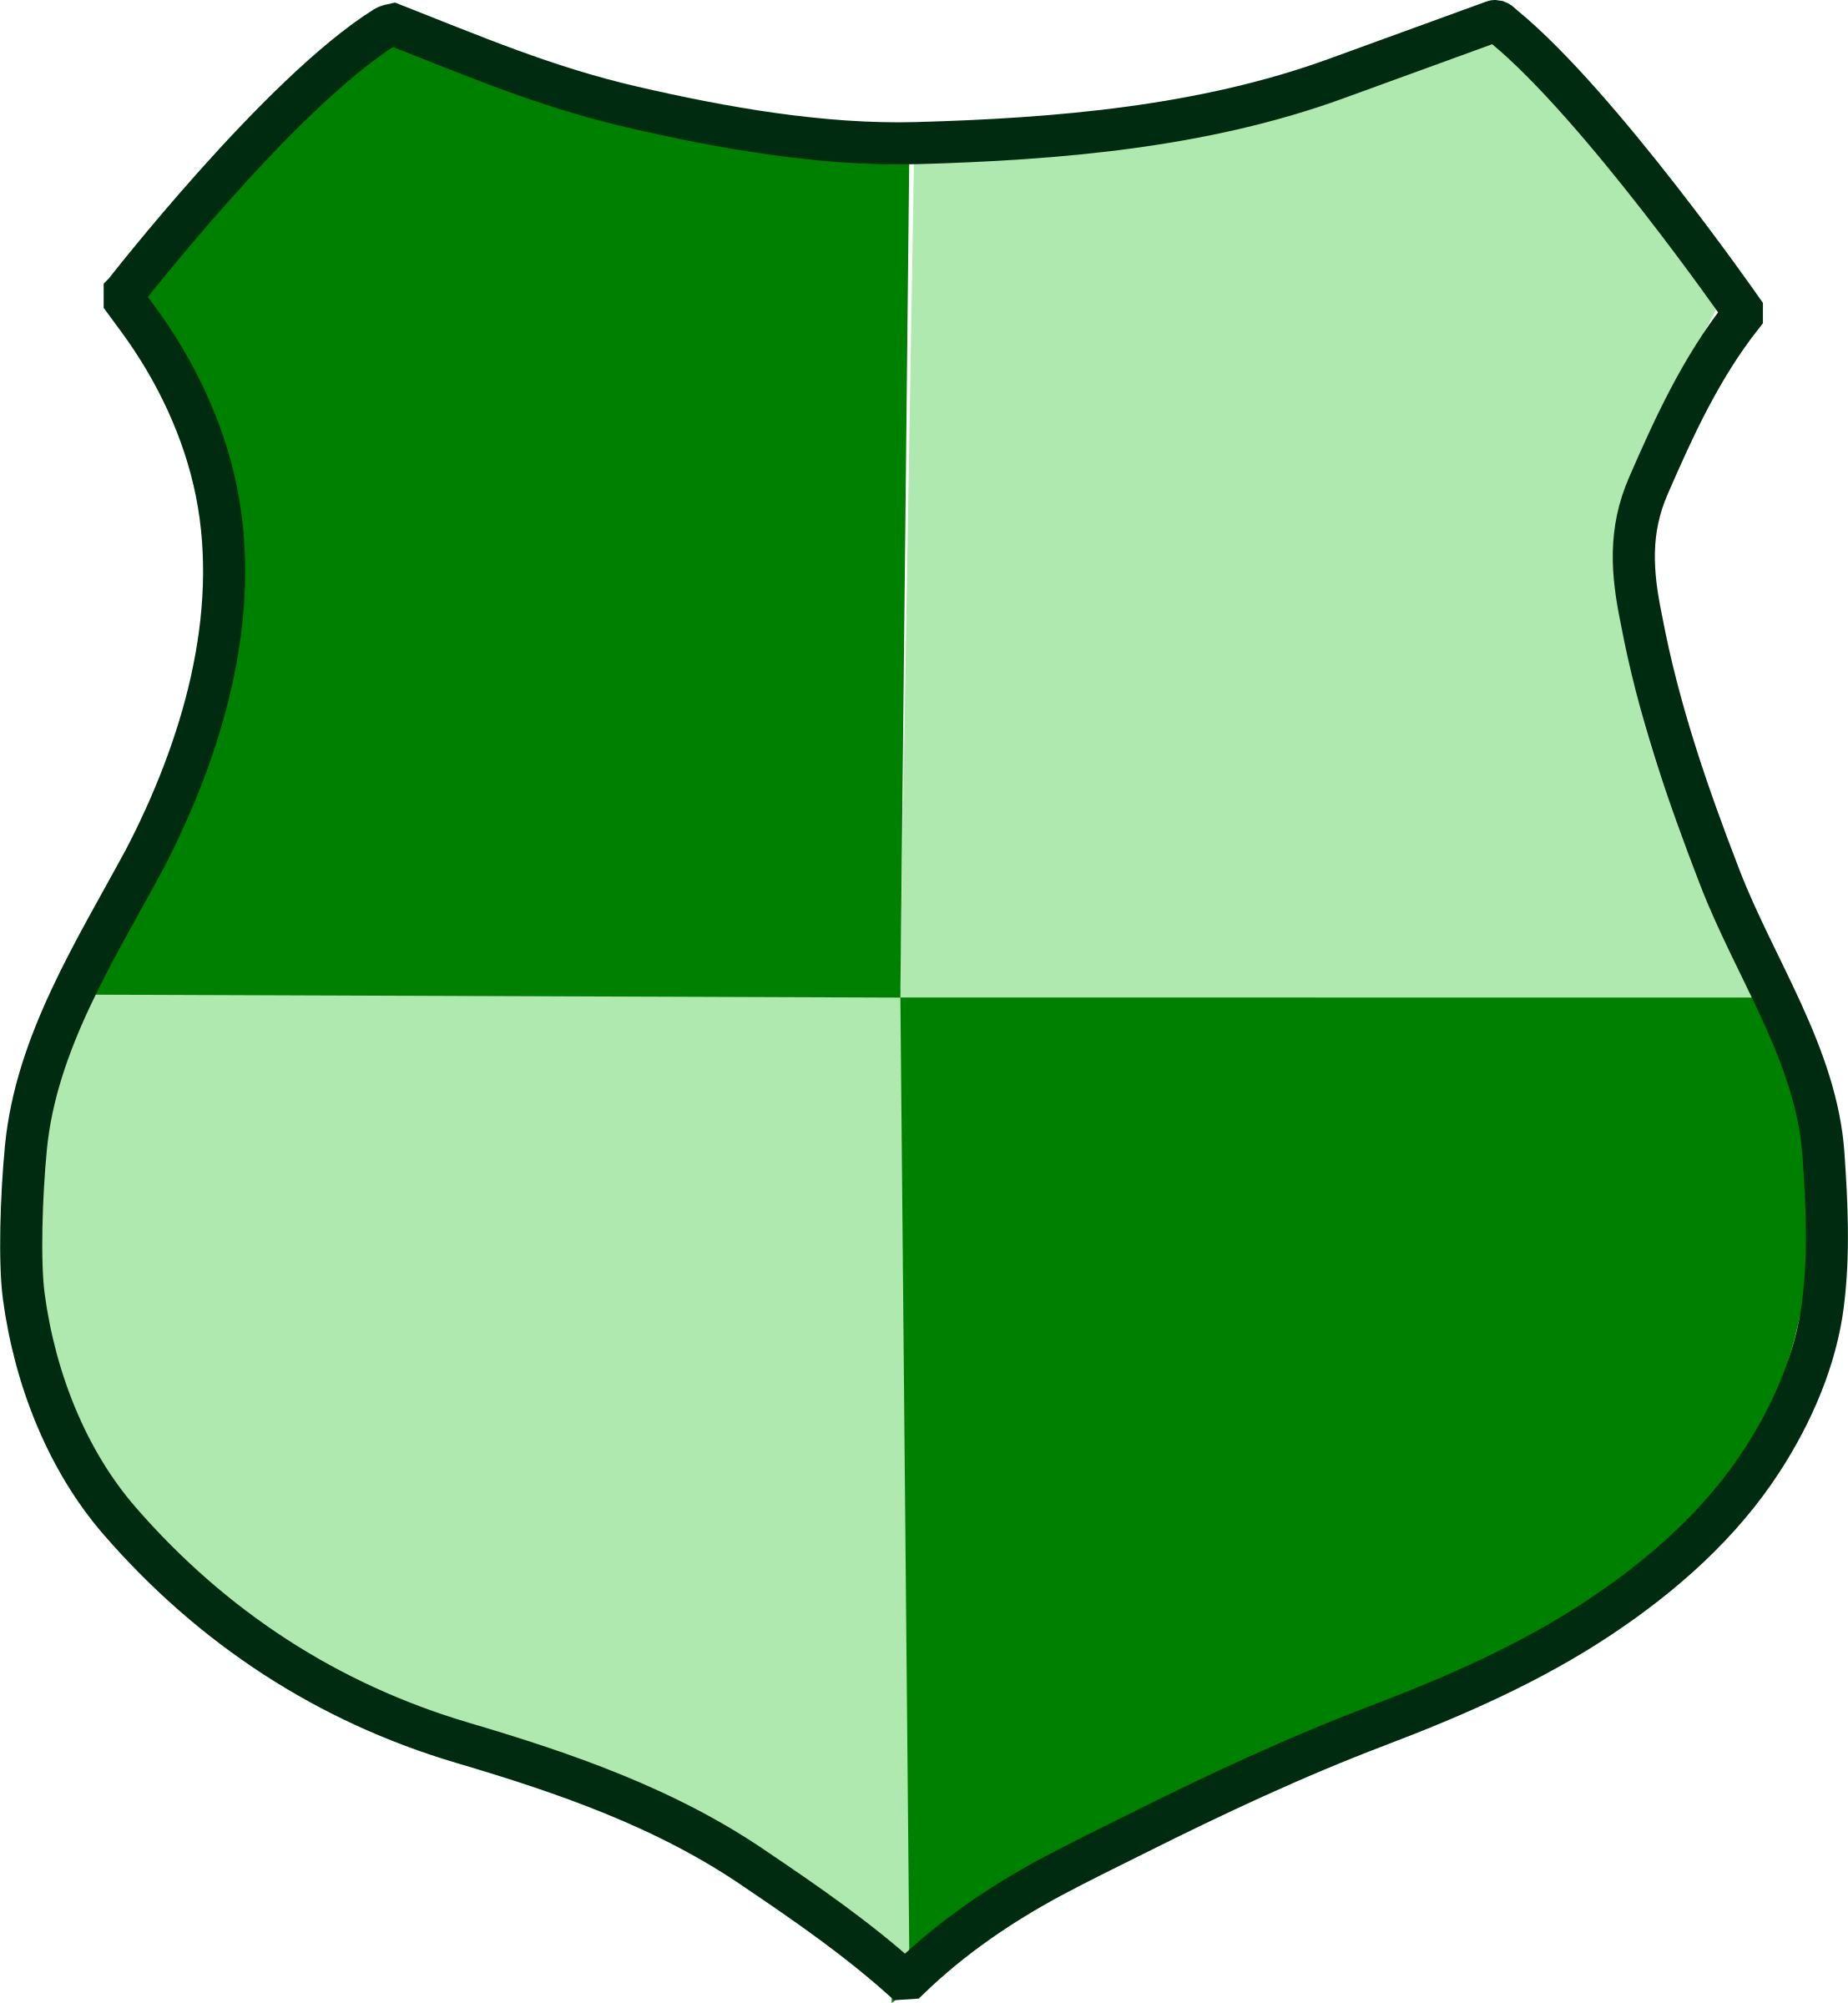 Green Shield Logo - Green Shield Icon PNG PNG and Icon Downloads